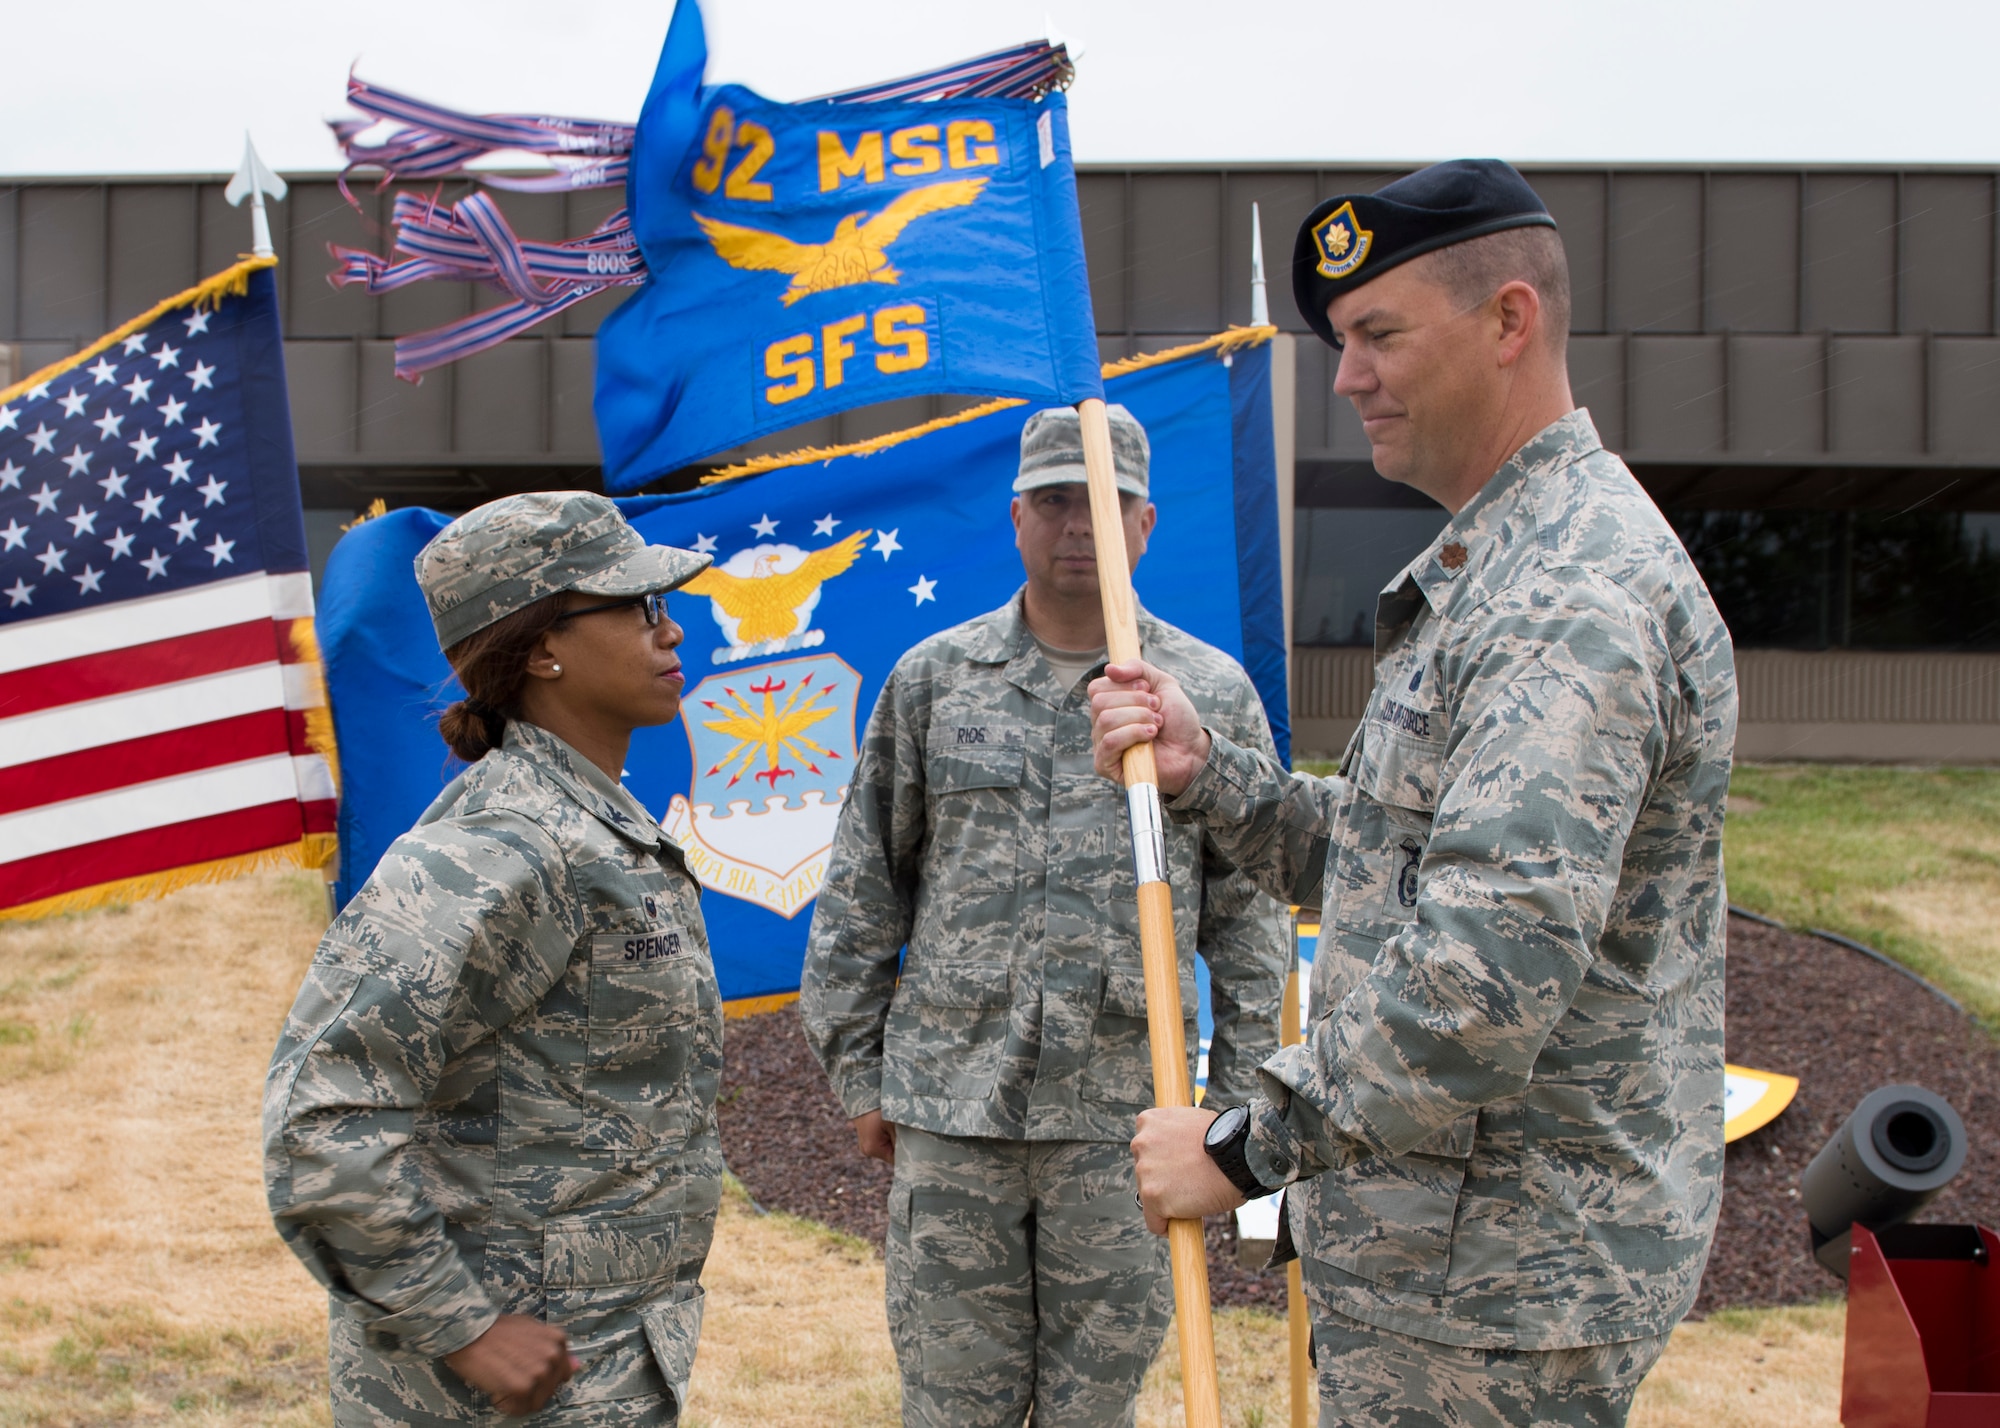 Maj. Cameron Maher accepts the 92nd Security Forces Squadron guidon from Col. Yvonne Spencer, 92nd Mission Support Group commander, as he assumes command during the 92nd Security Forces Squadron change of command ceremony June 8, 2017, at Fairchild Air Force, Washington. Maher previously served as Chief of Nuclear Security, Air Combat Command, Langley AFB, Virginia.
(U.S. Air Force Photo / Airman 1st Class Ryan Lackey)